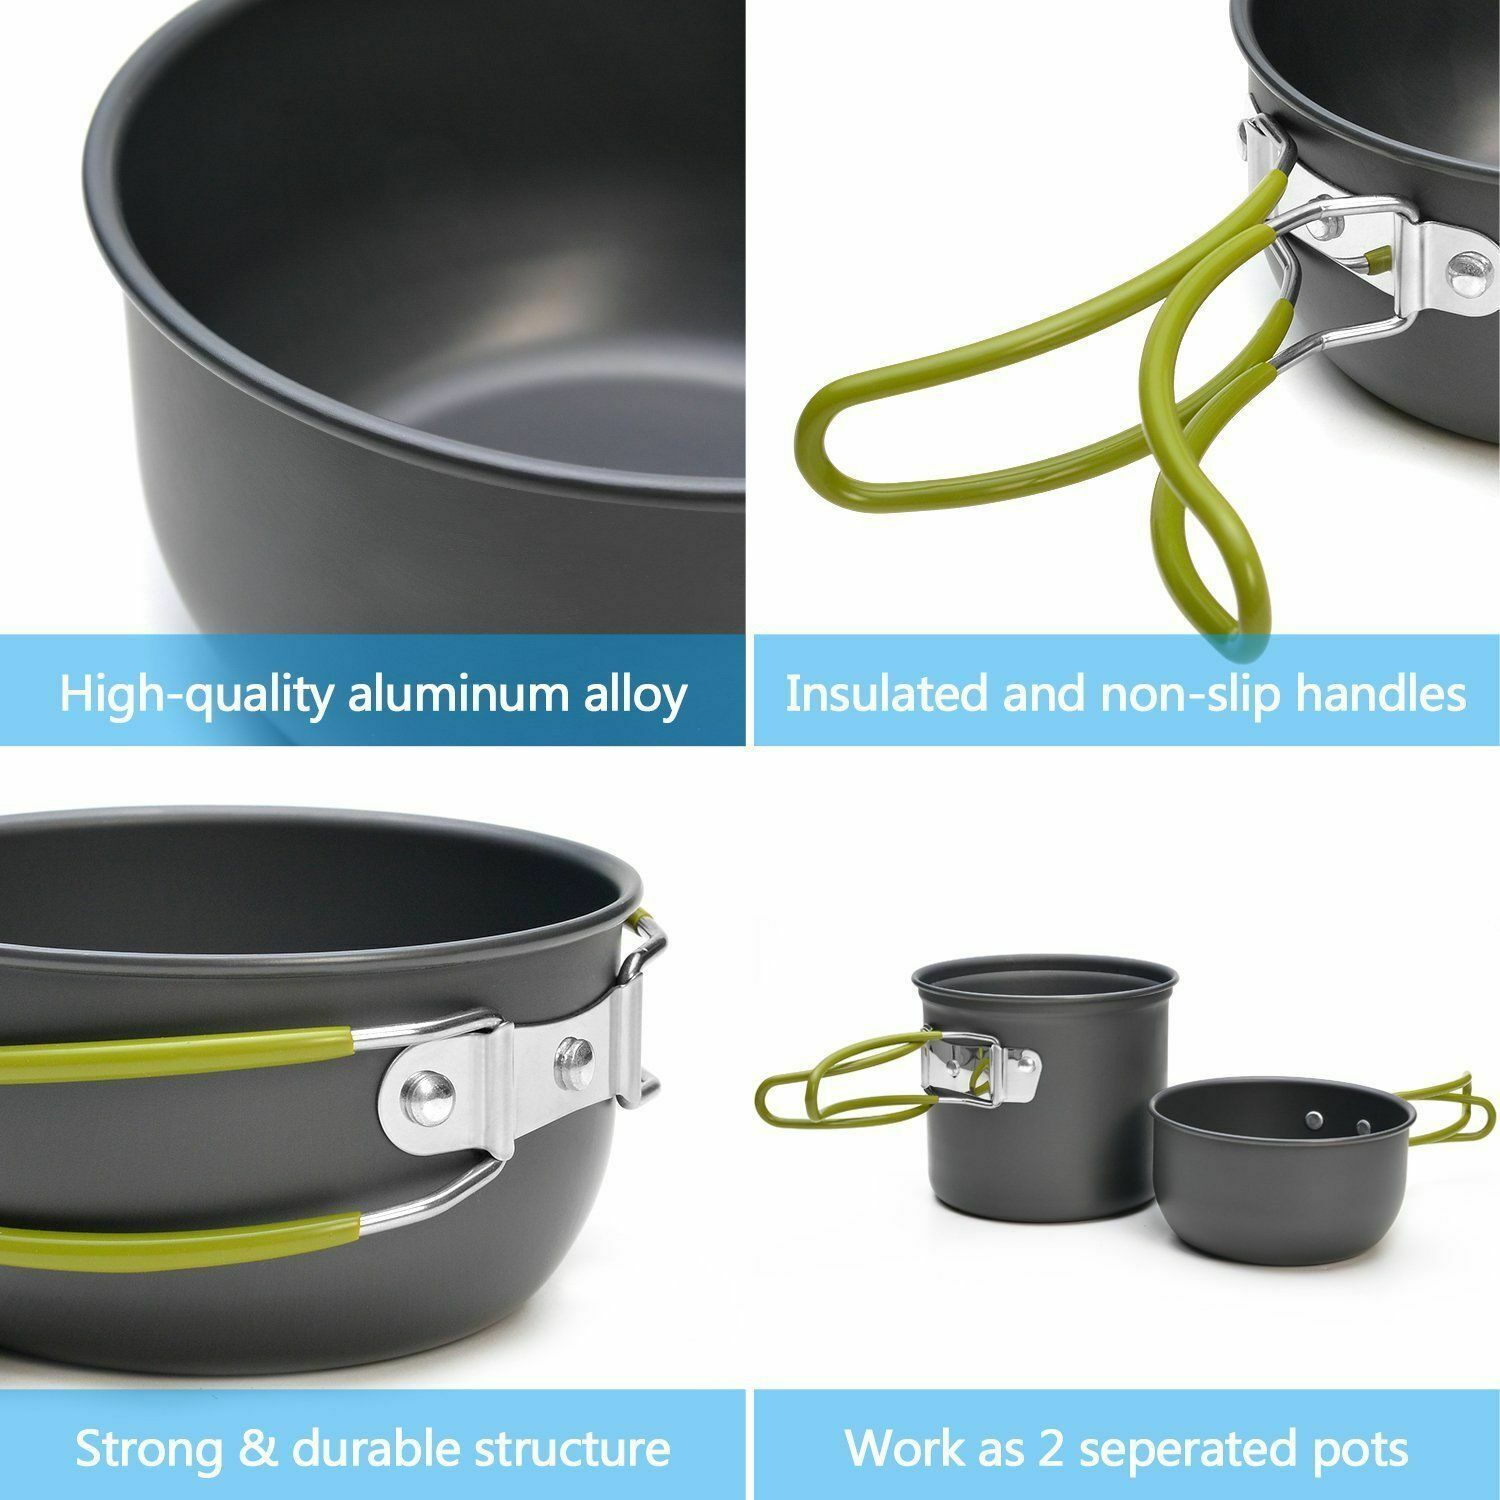 GL Portable Light Outdoor Camping Cookware Sets Gas Stove with Foldable Tableware Pan Dishwashing Sponge Hiking Picnic Tool 7